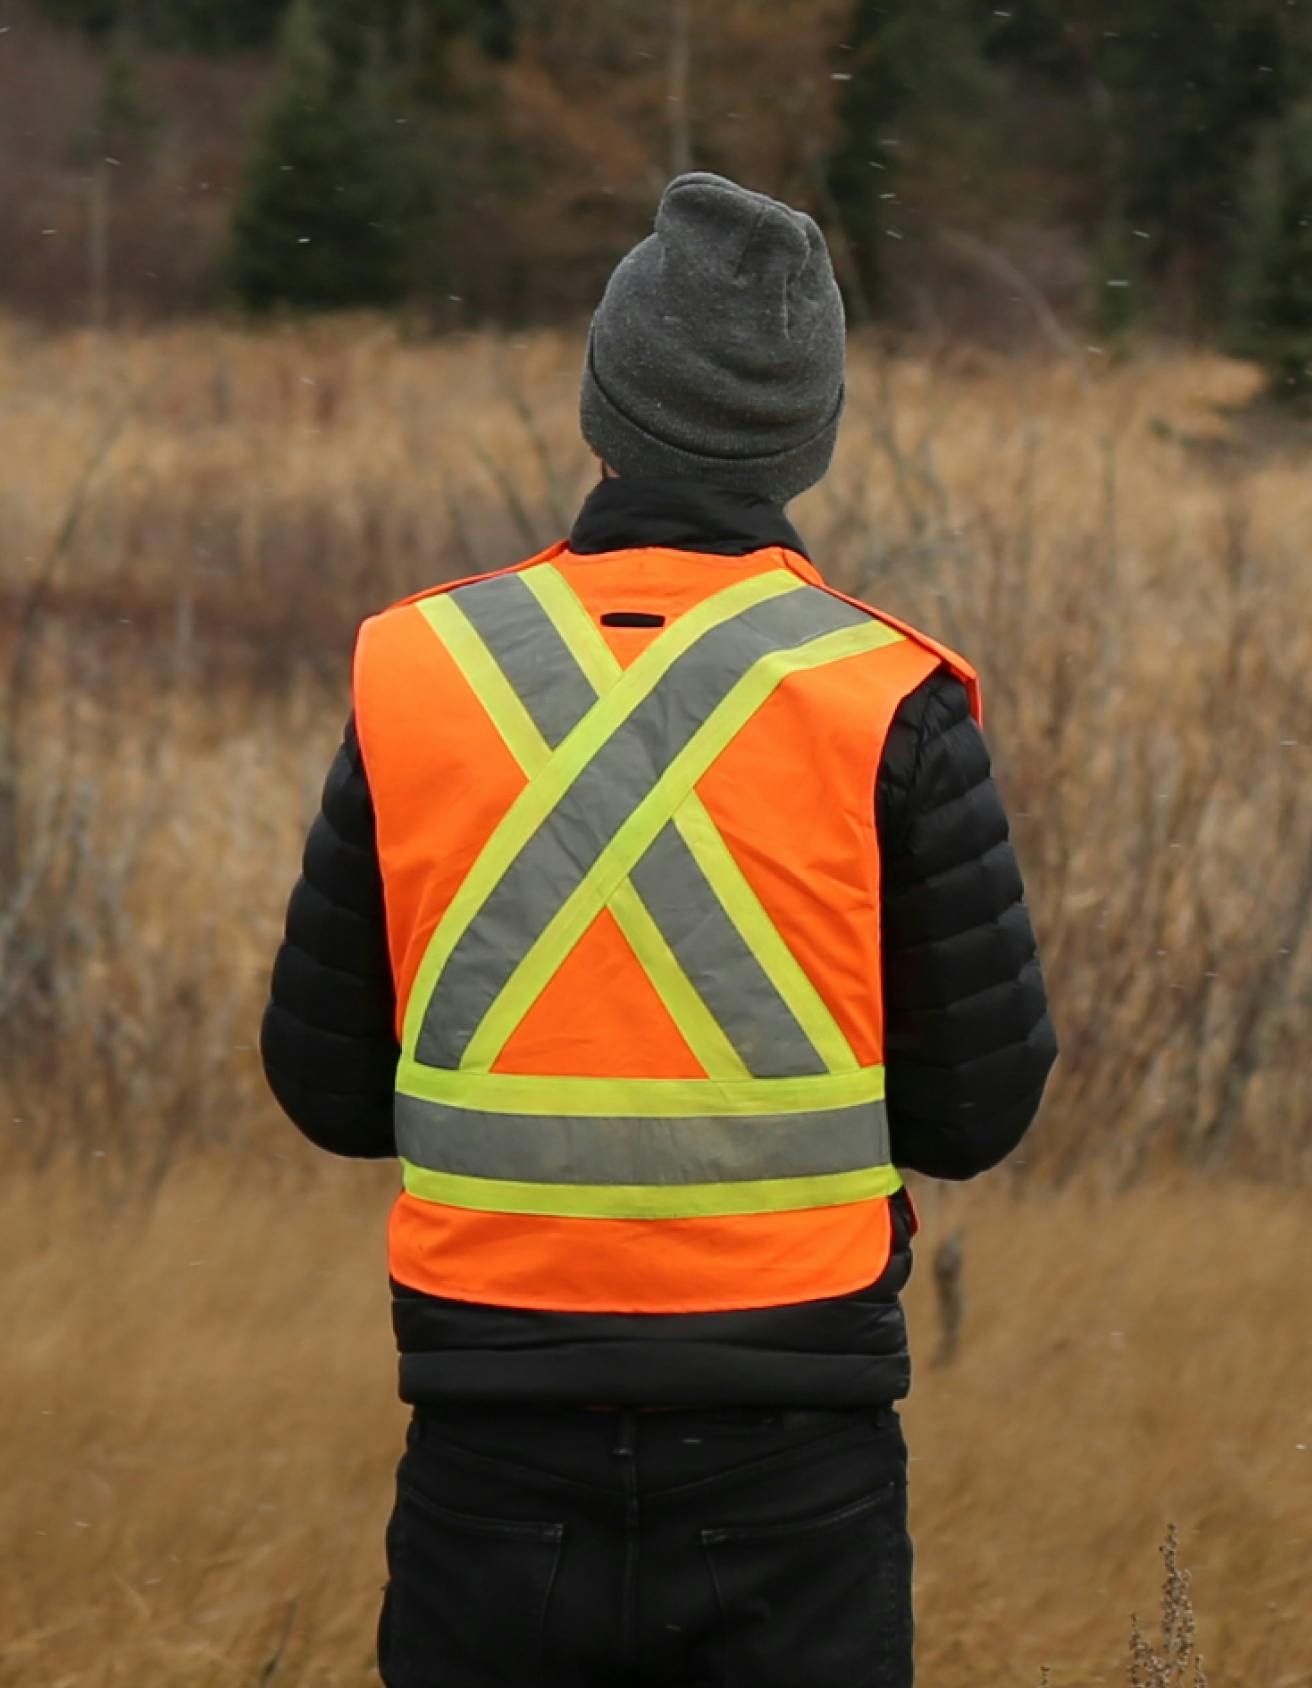 The back of a person wearing a toque jacket and reflective vest standing in an area of ground bush